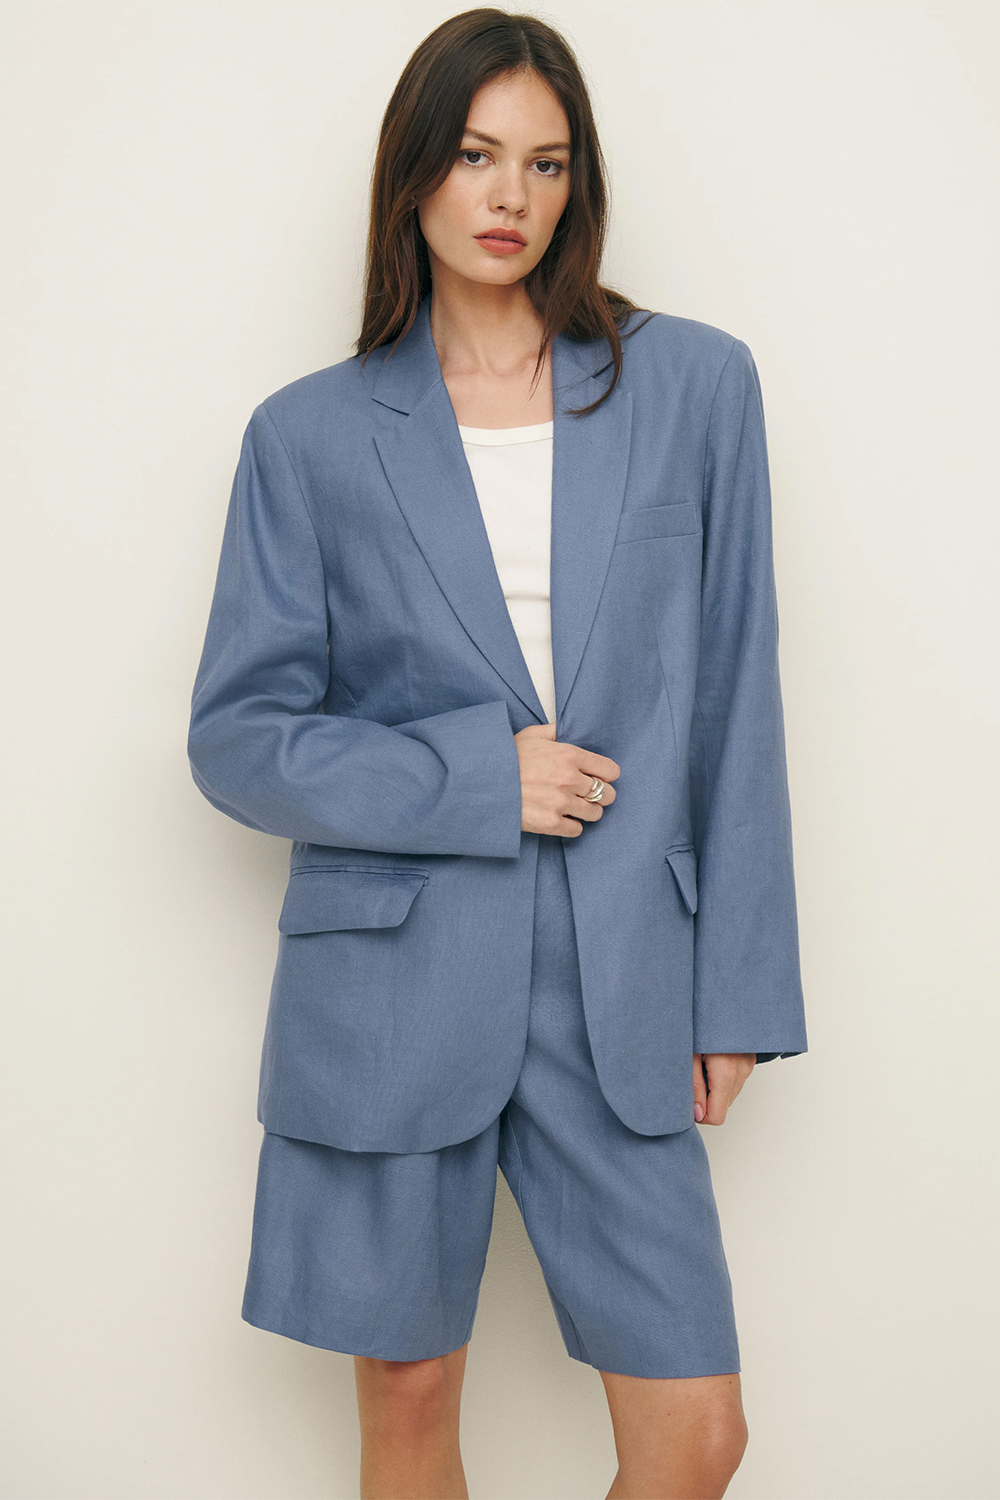 i will be living in reformation's linen collection all summer and here's why